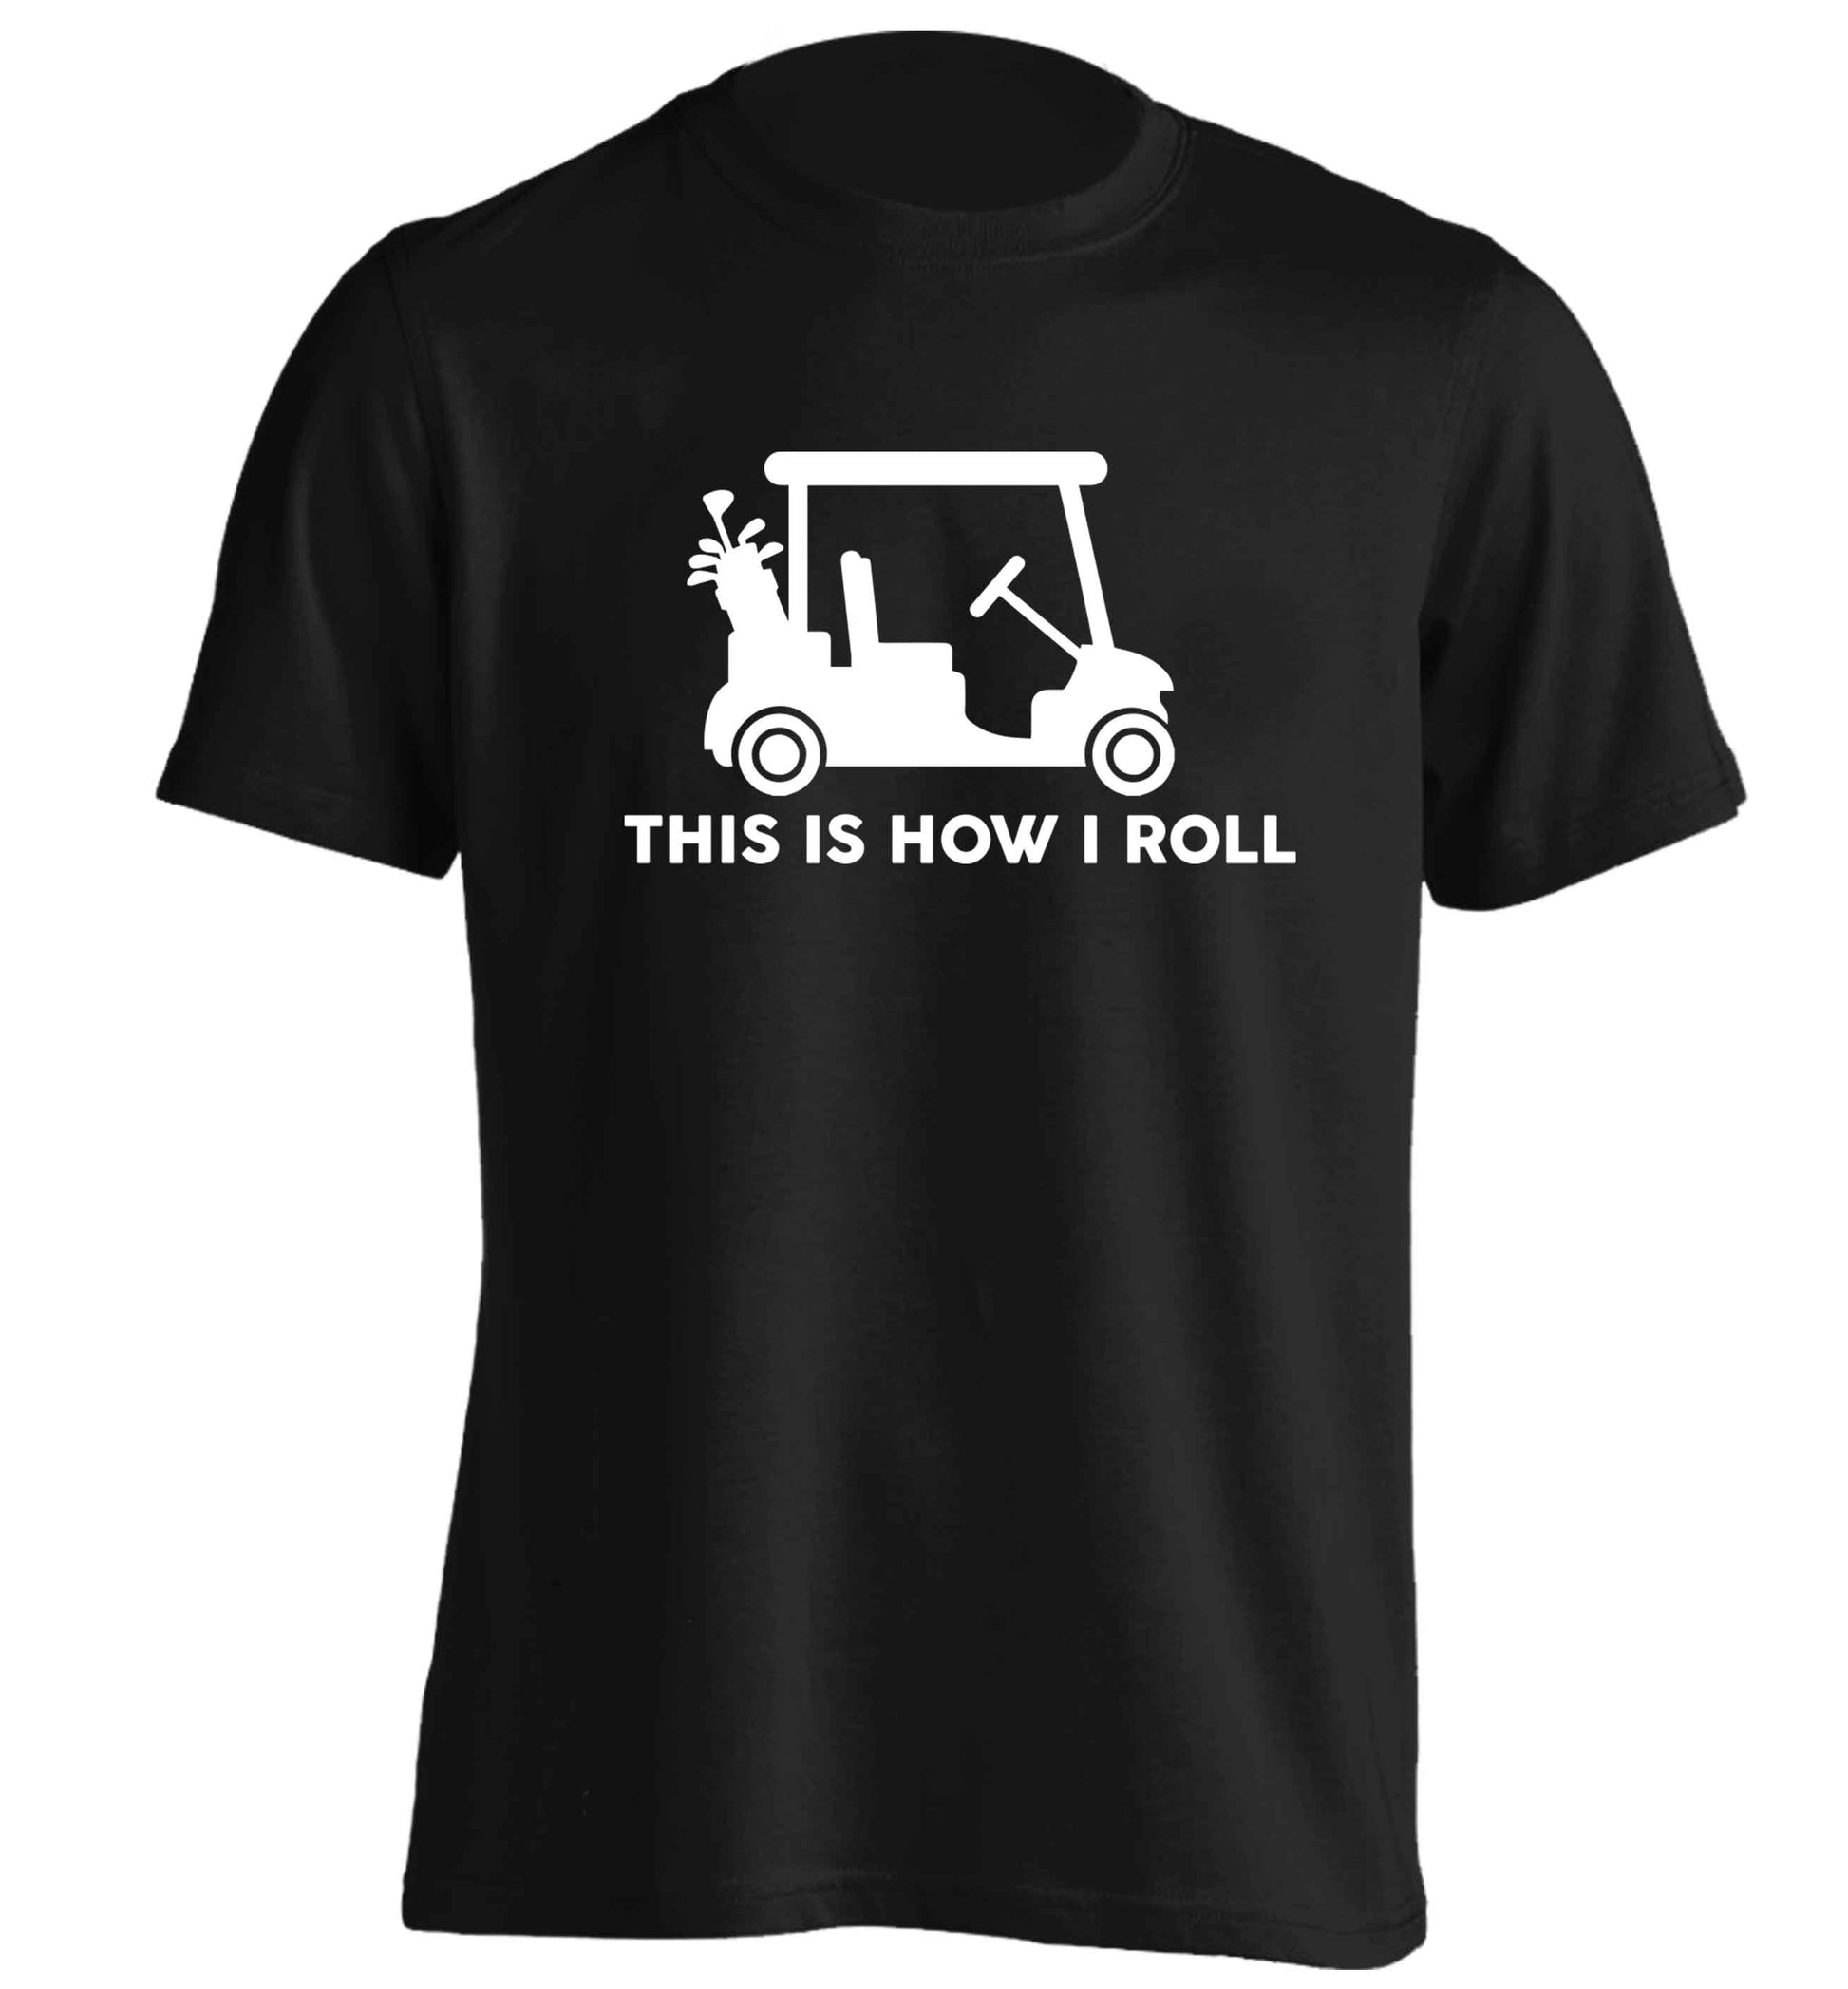 This is how I roll golf cart adults unisex black Tshirt 2XL